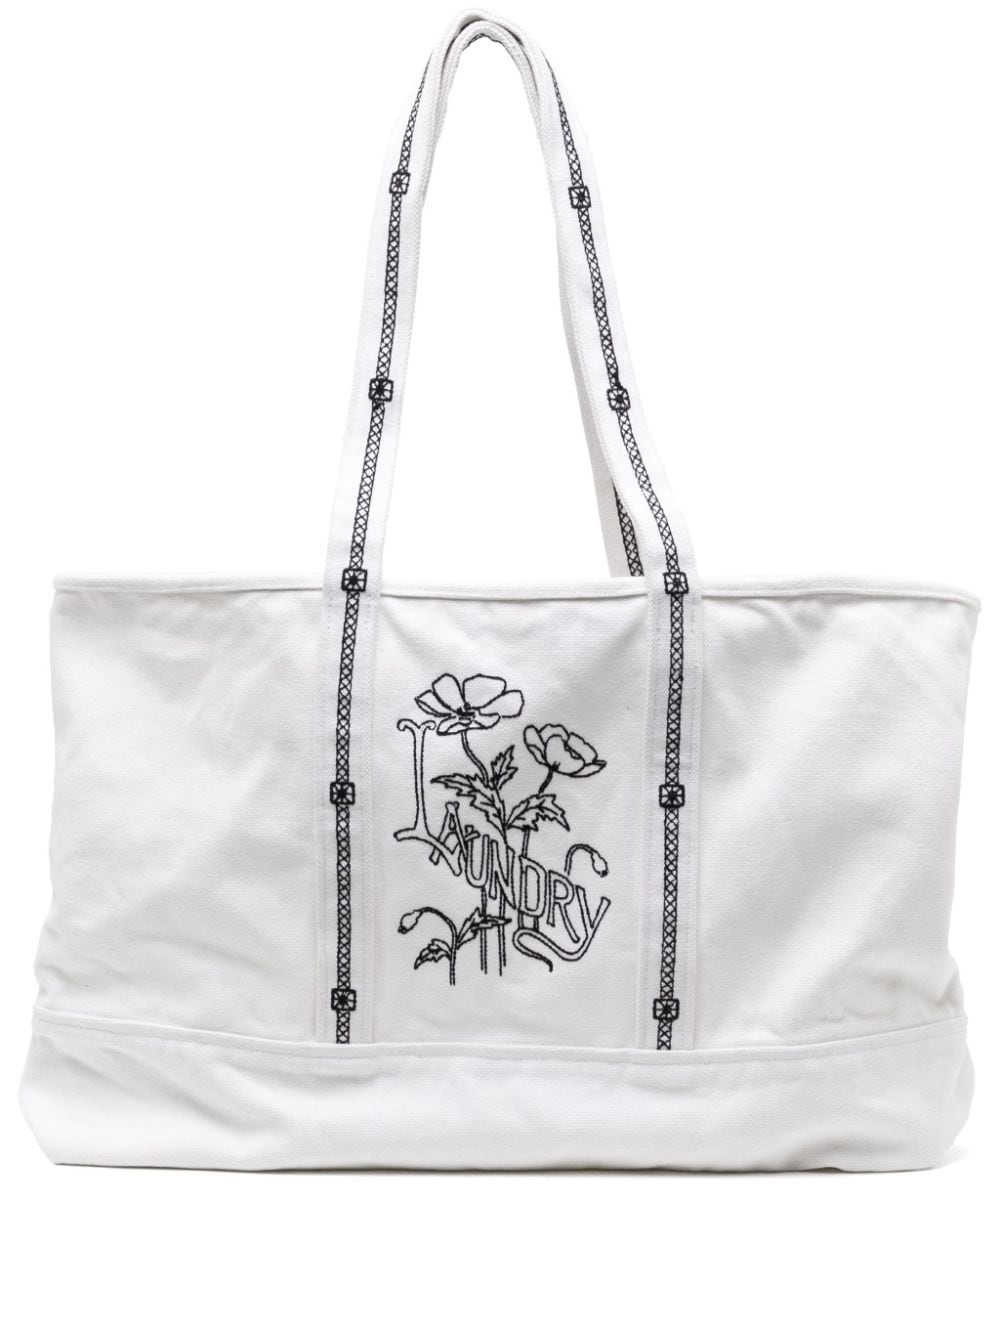 Laundry embroidered tote bag